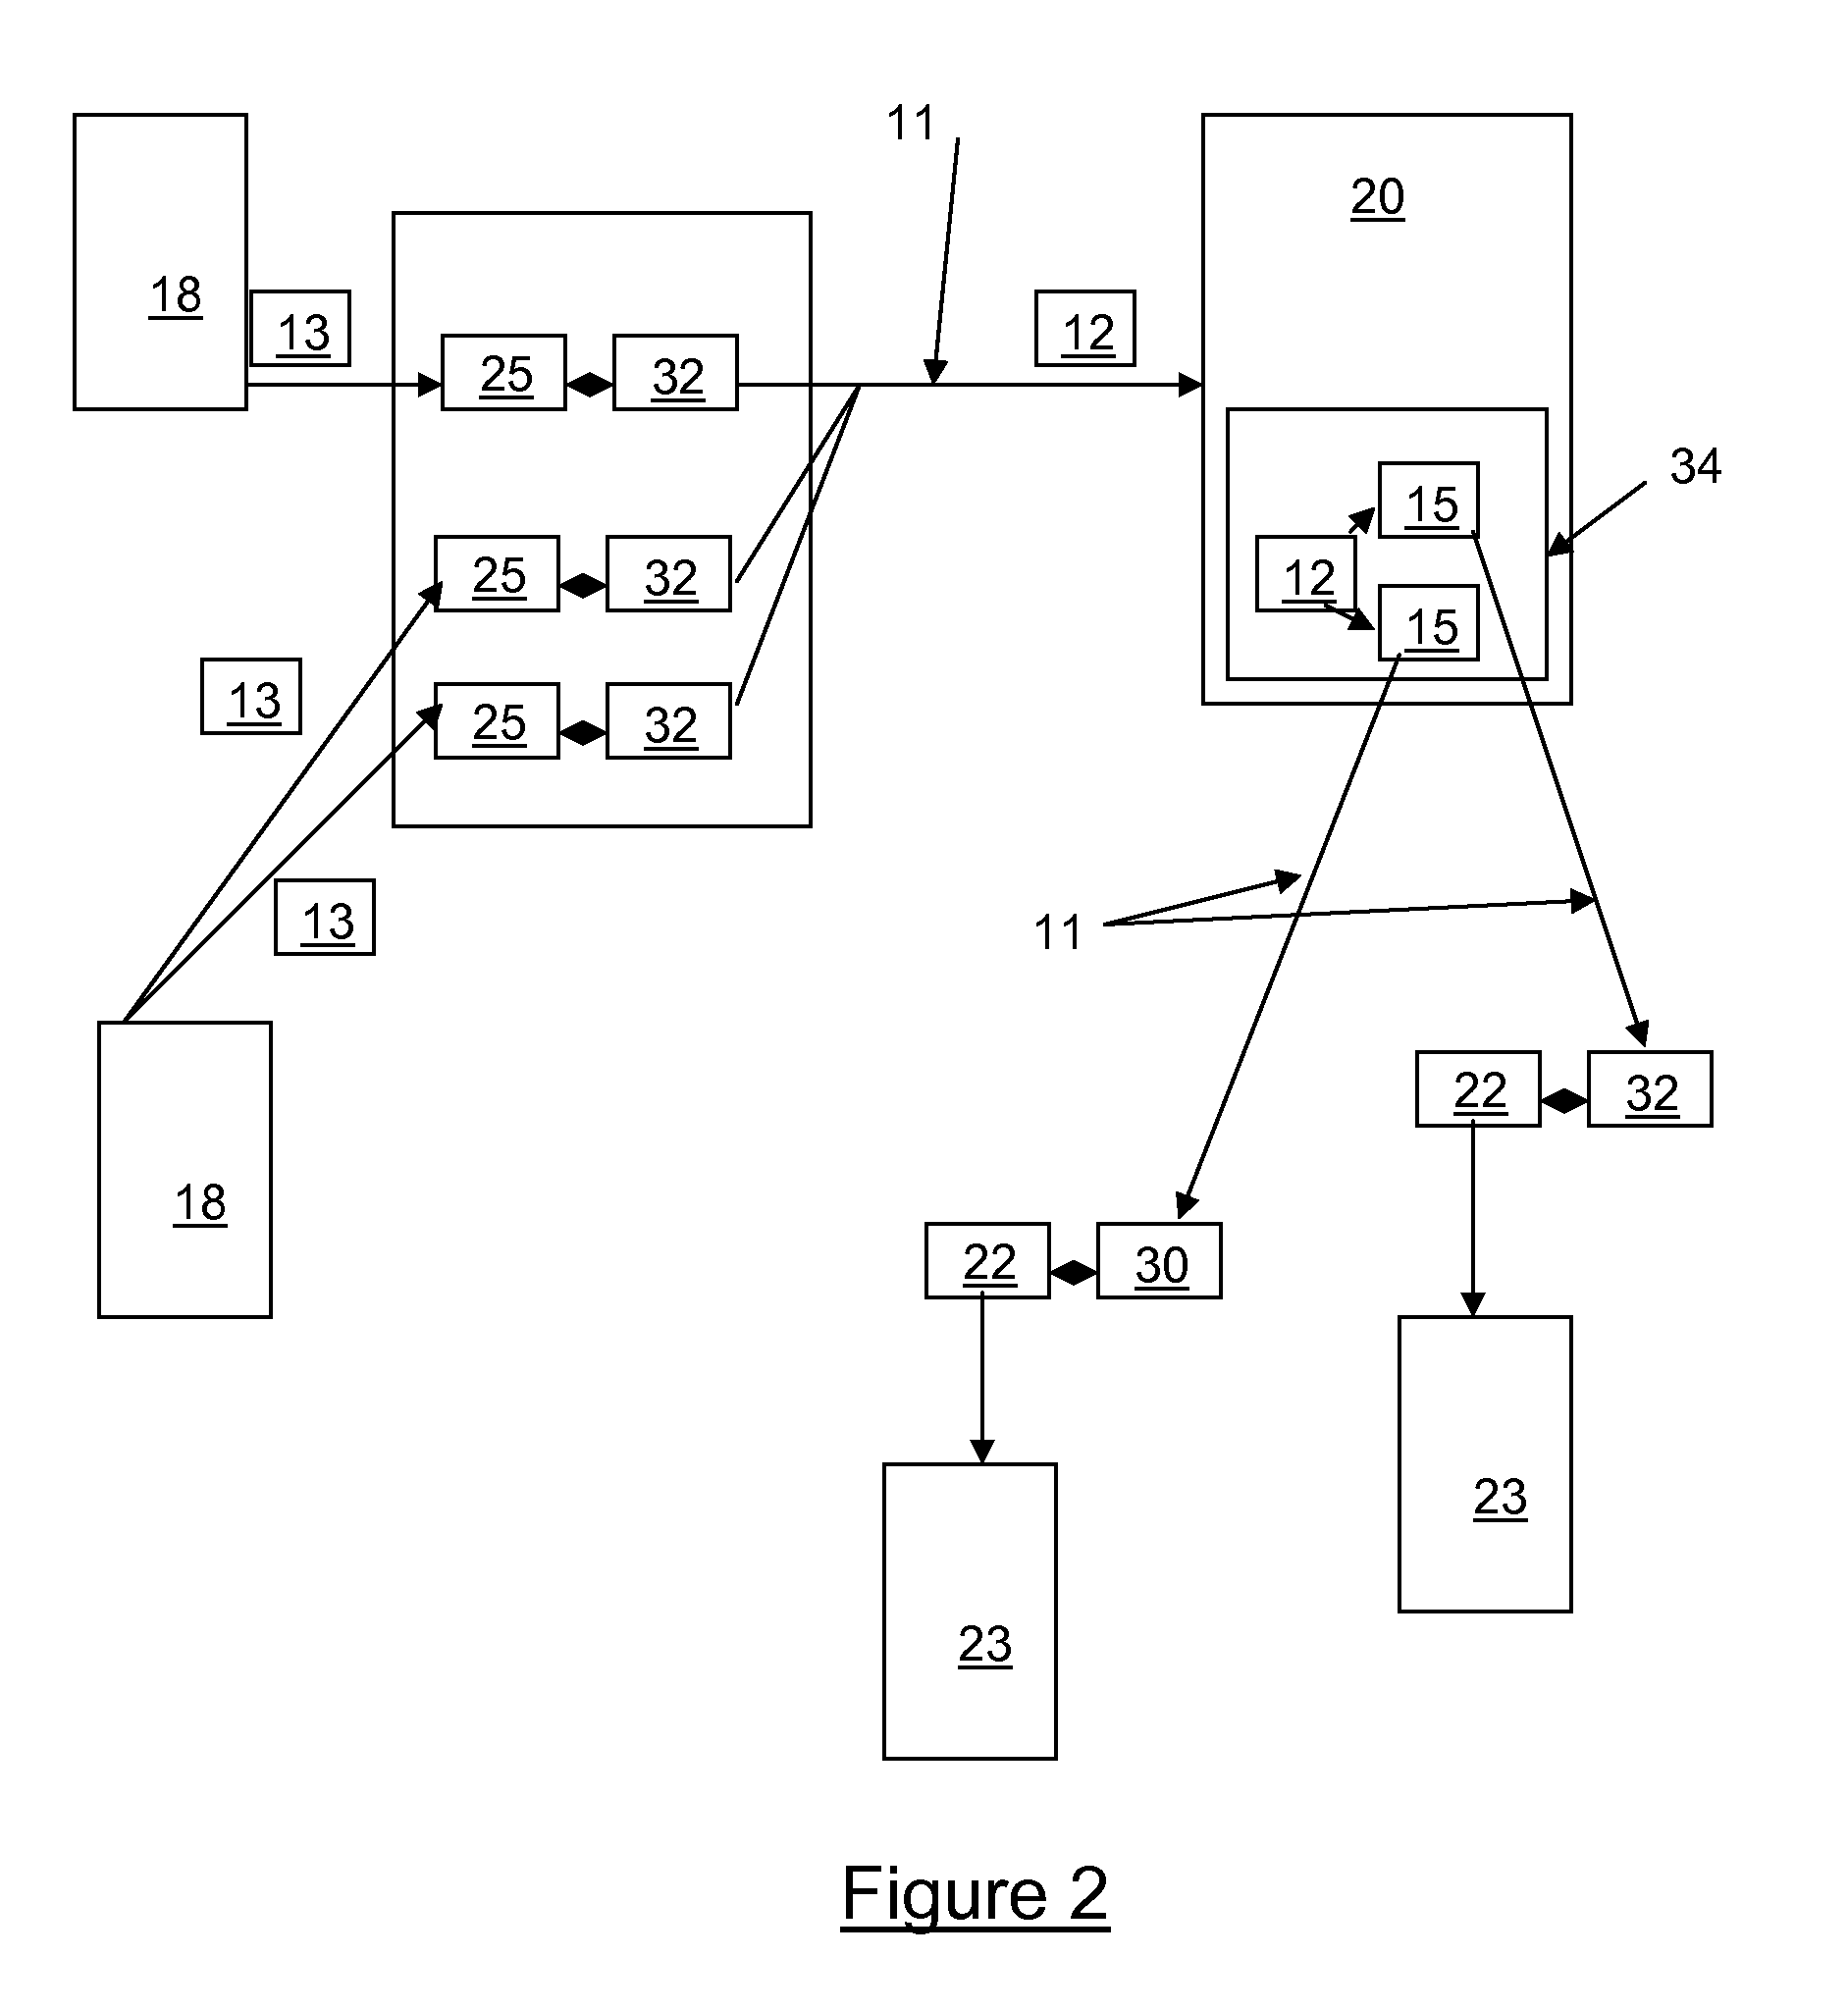 Encoder and decoder configuration for addressing latency of communications over a packet based network